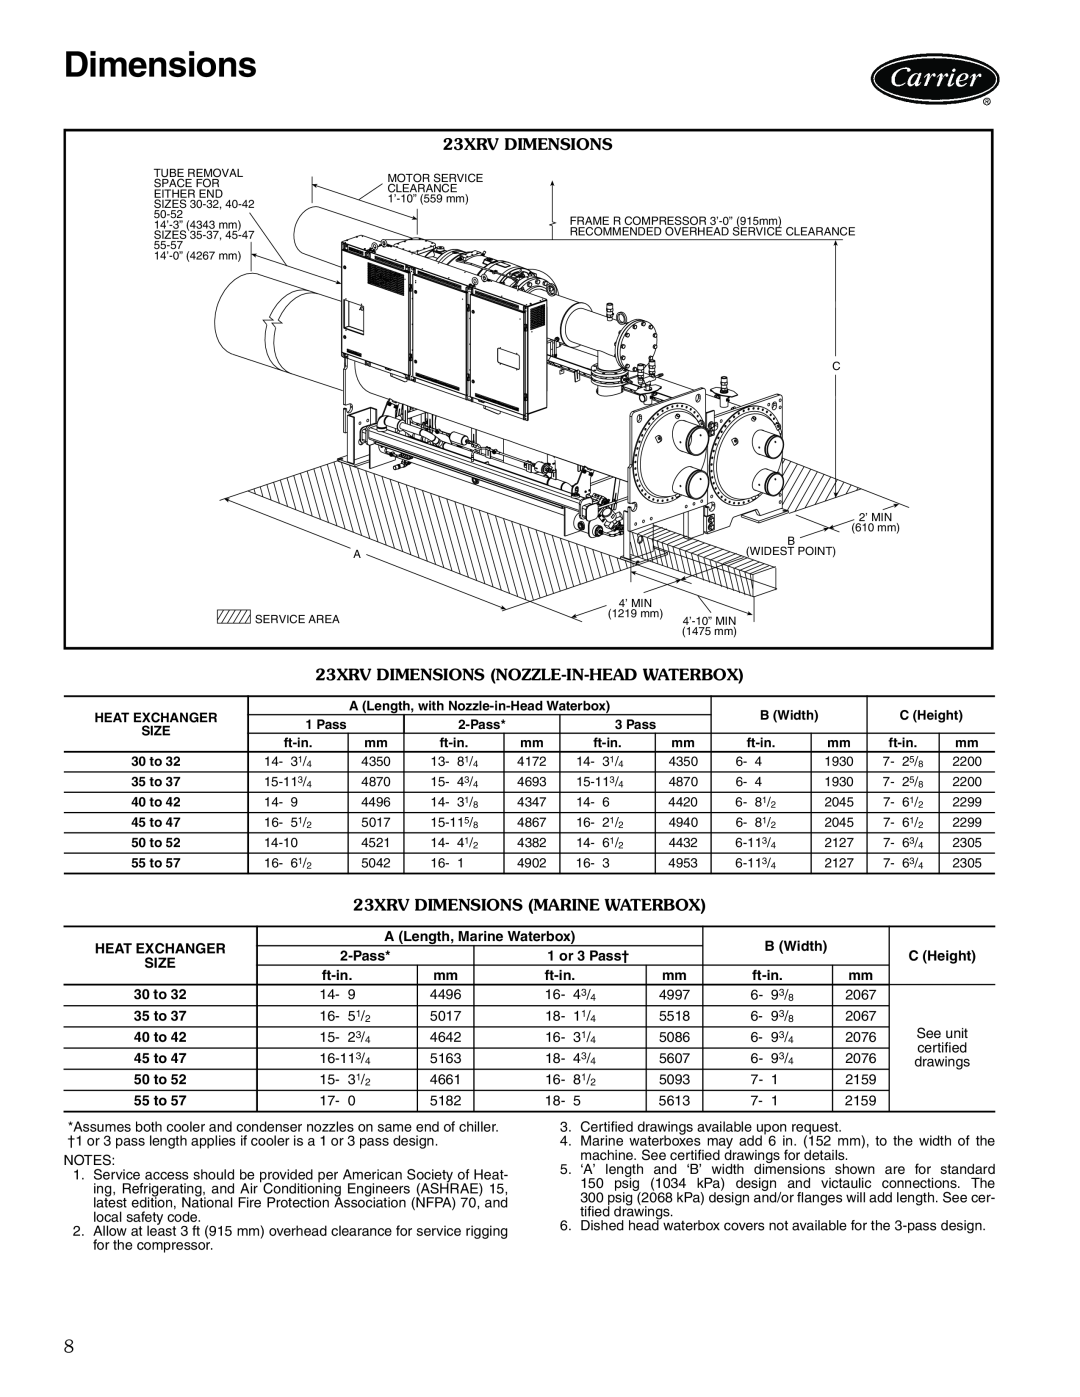 Carrier manual Dimensions, a23-1646, 23XRV DIMENSIONS NOZZLE-IN-HEAD WATERBOX, 23XRV DIMENSIONS MARINE WATERBOX 